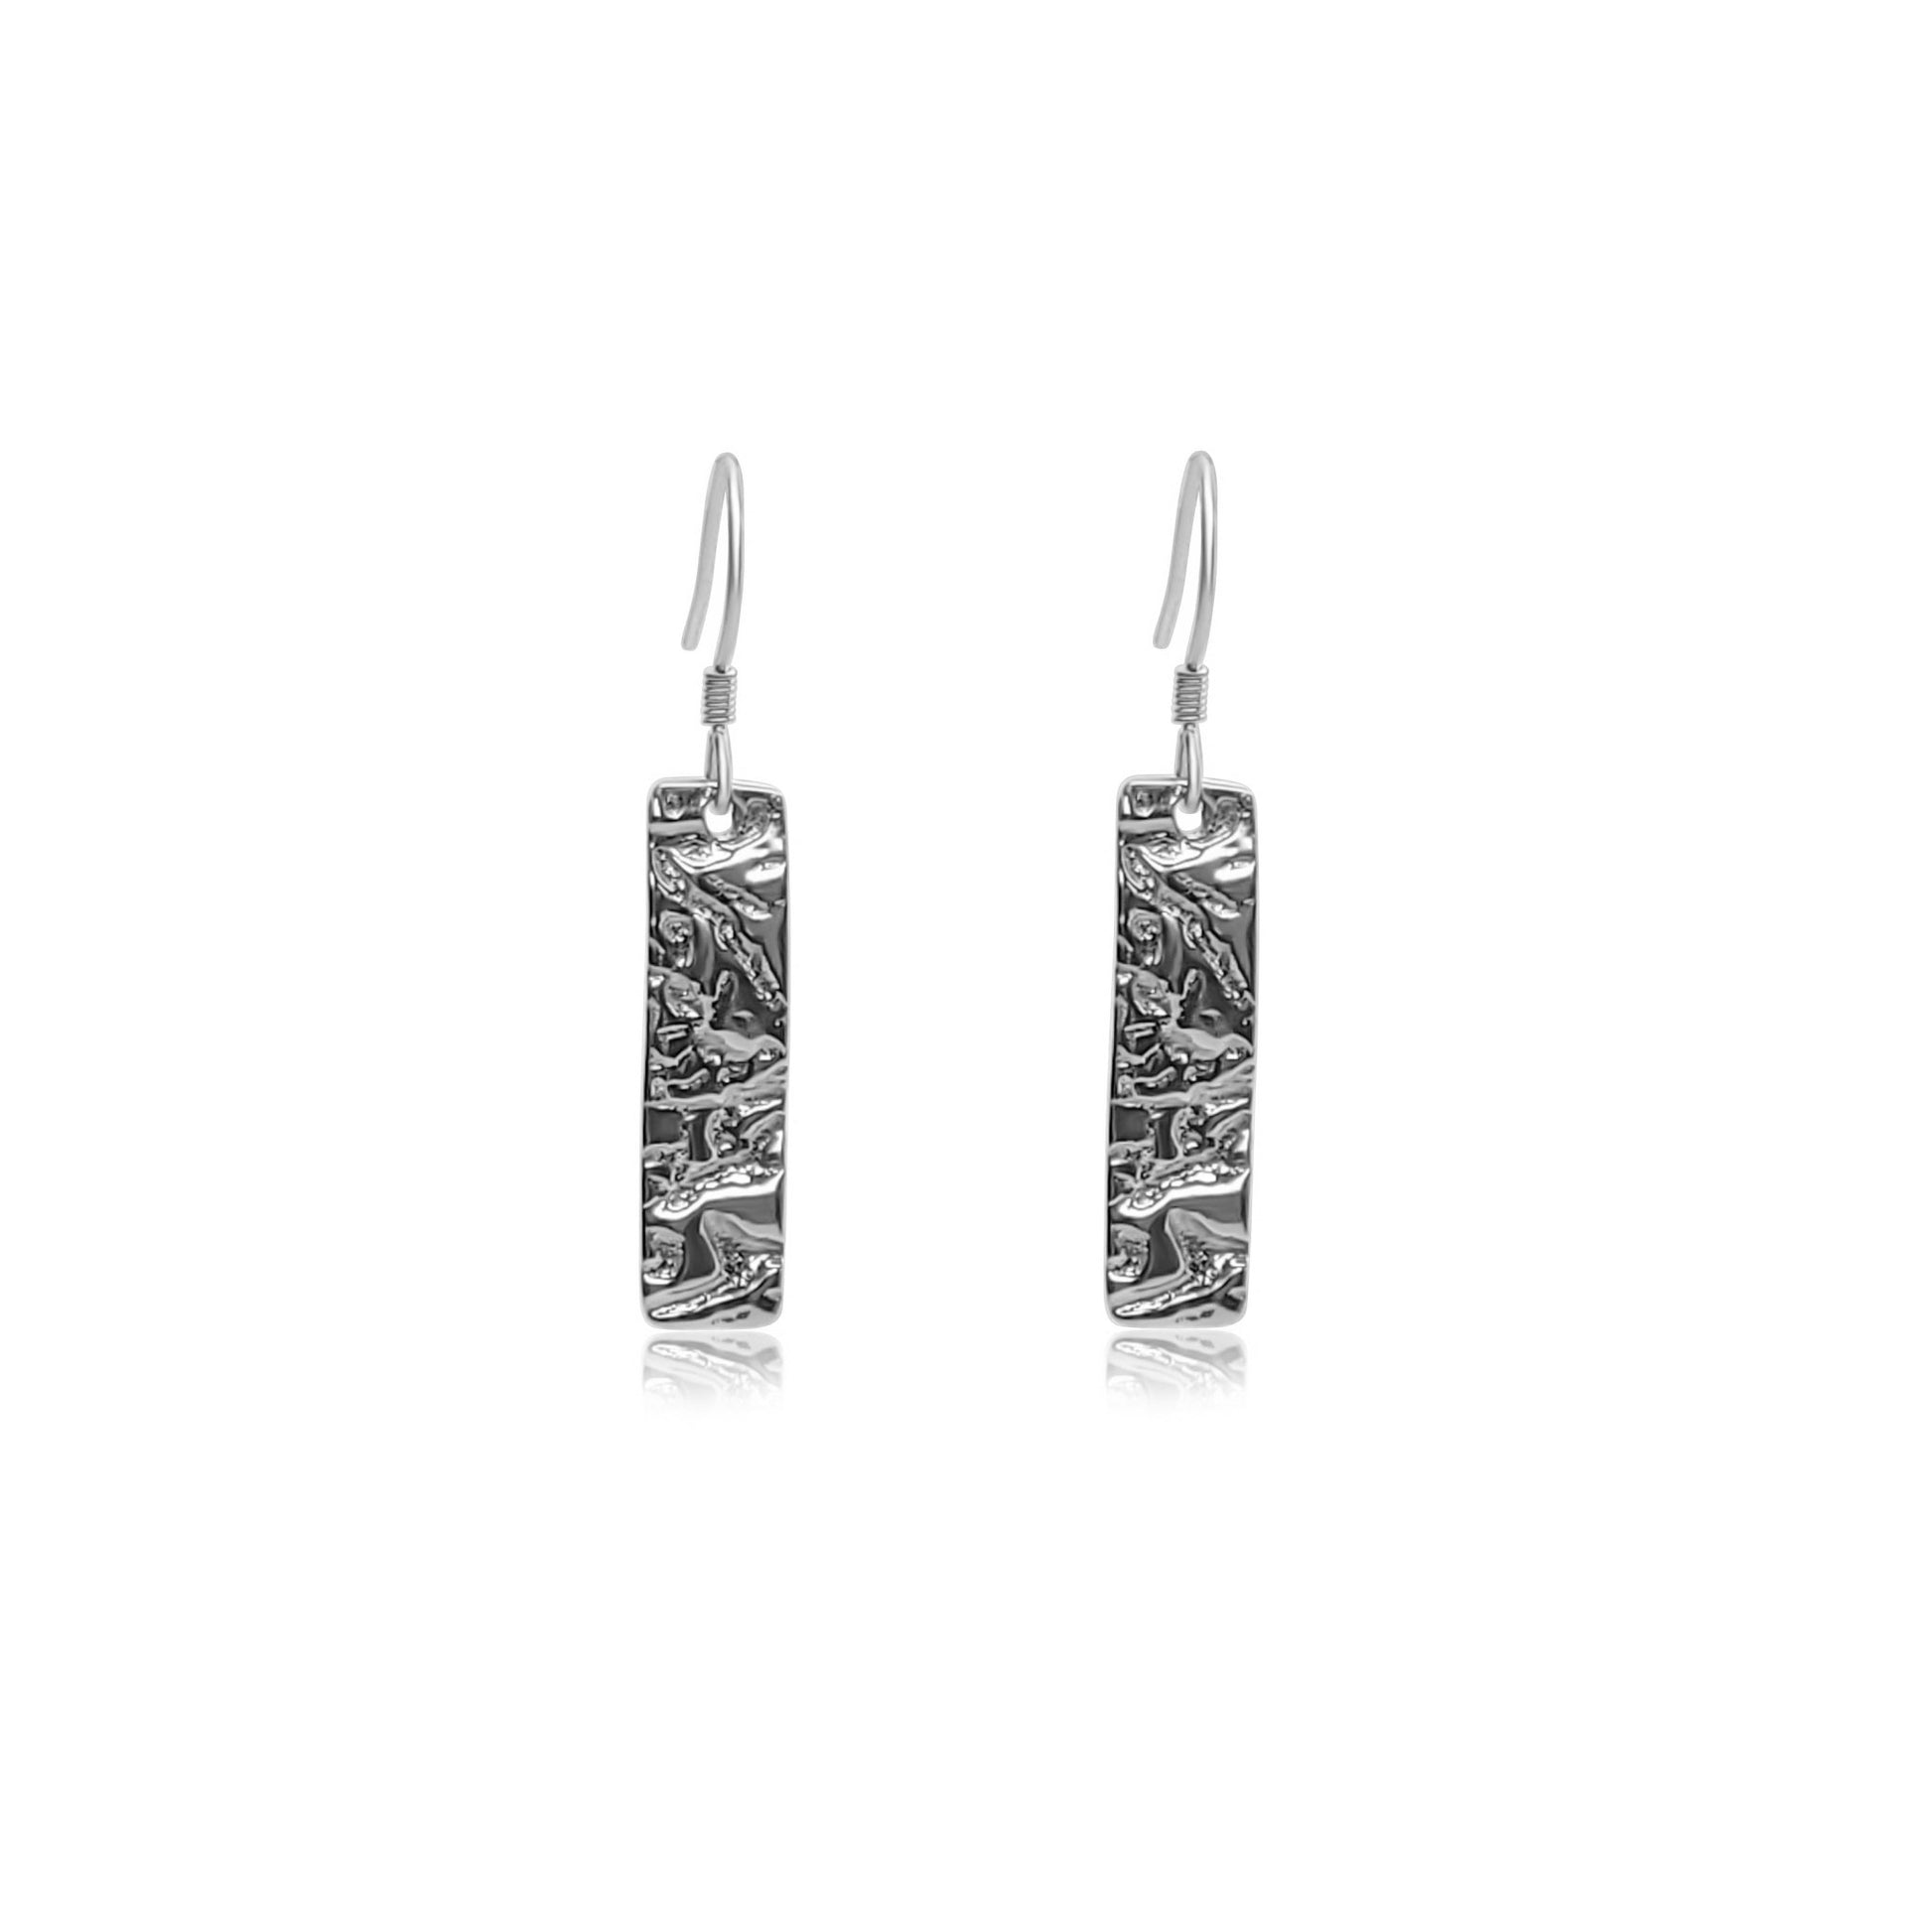 sterling silver drop earrings with thin rectangle pendant with a captivating driftwood texture